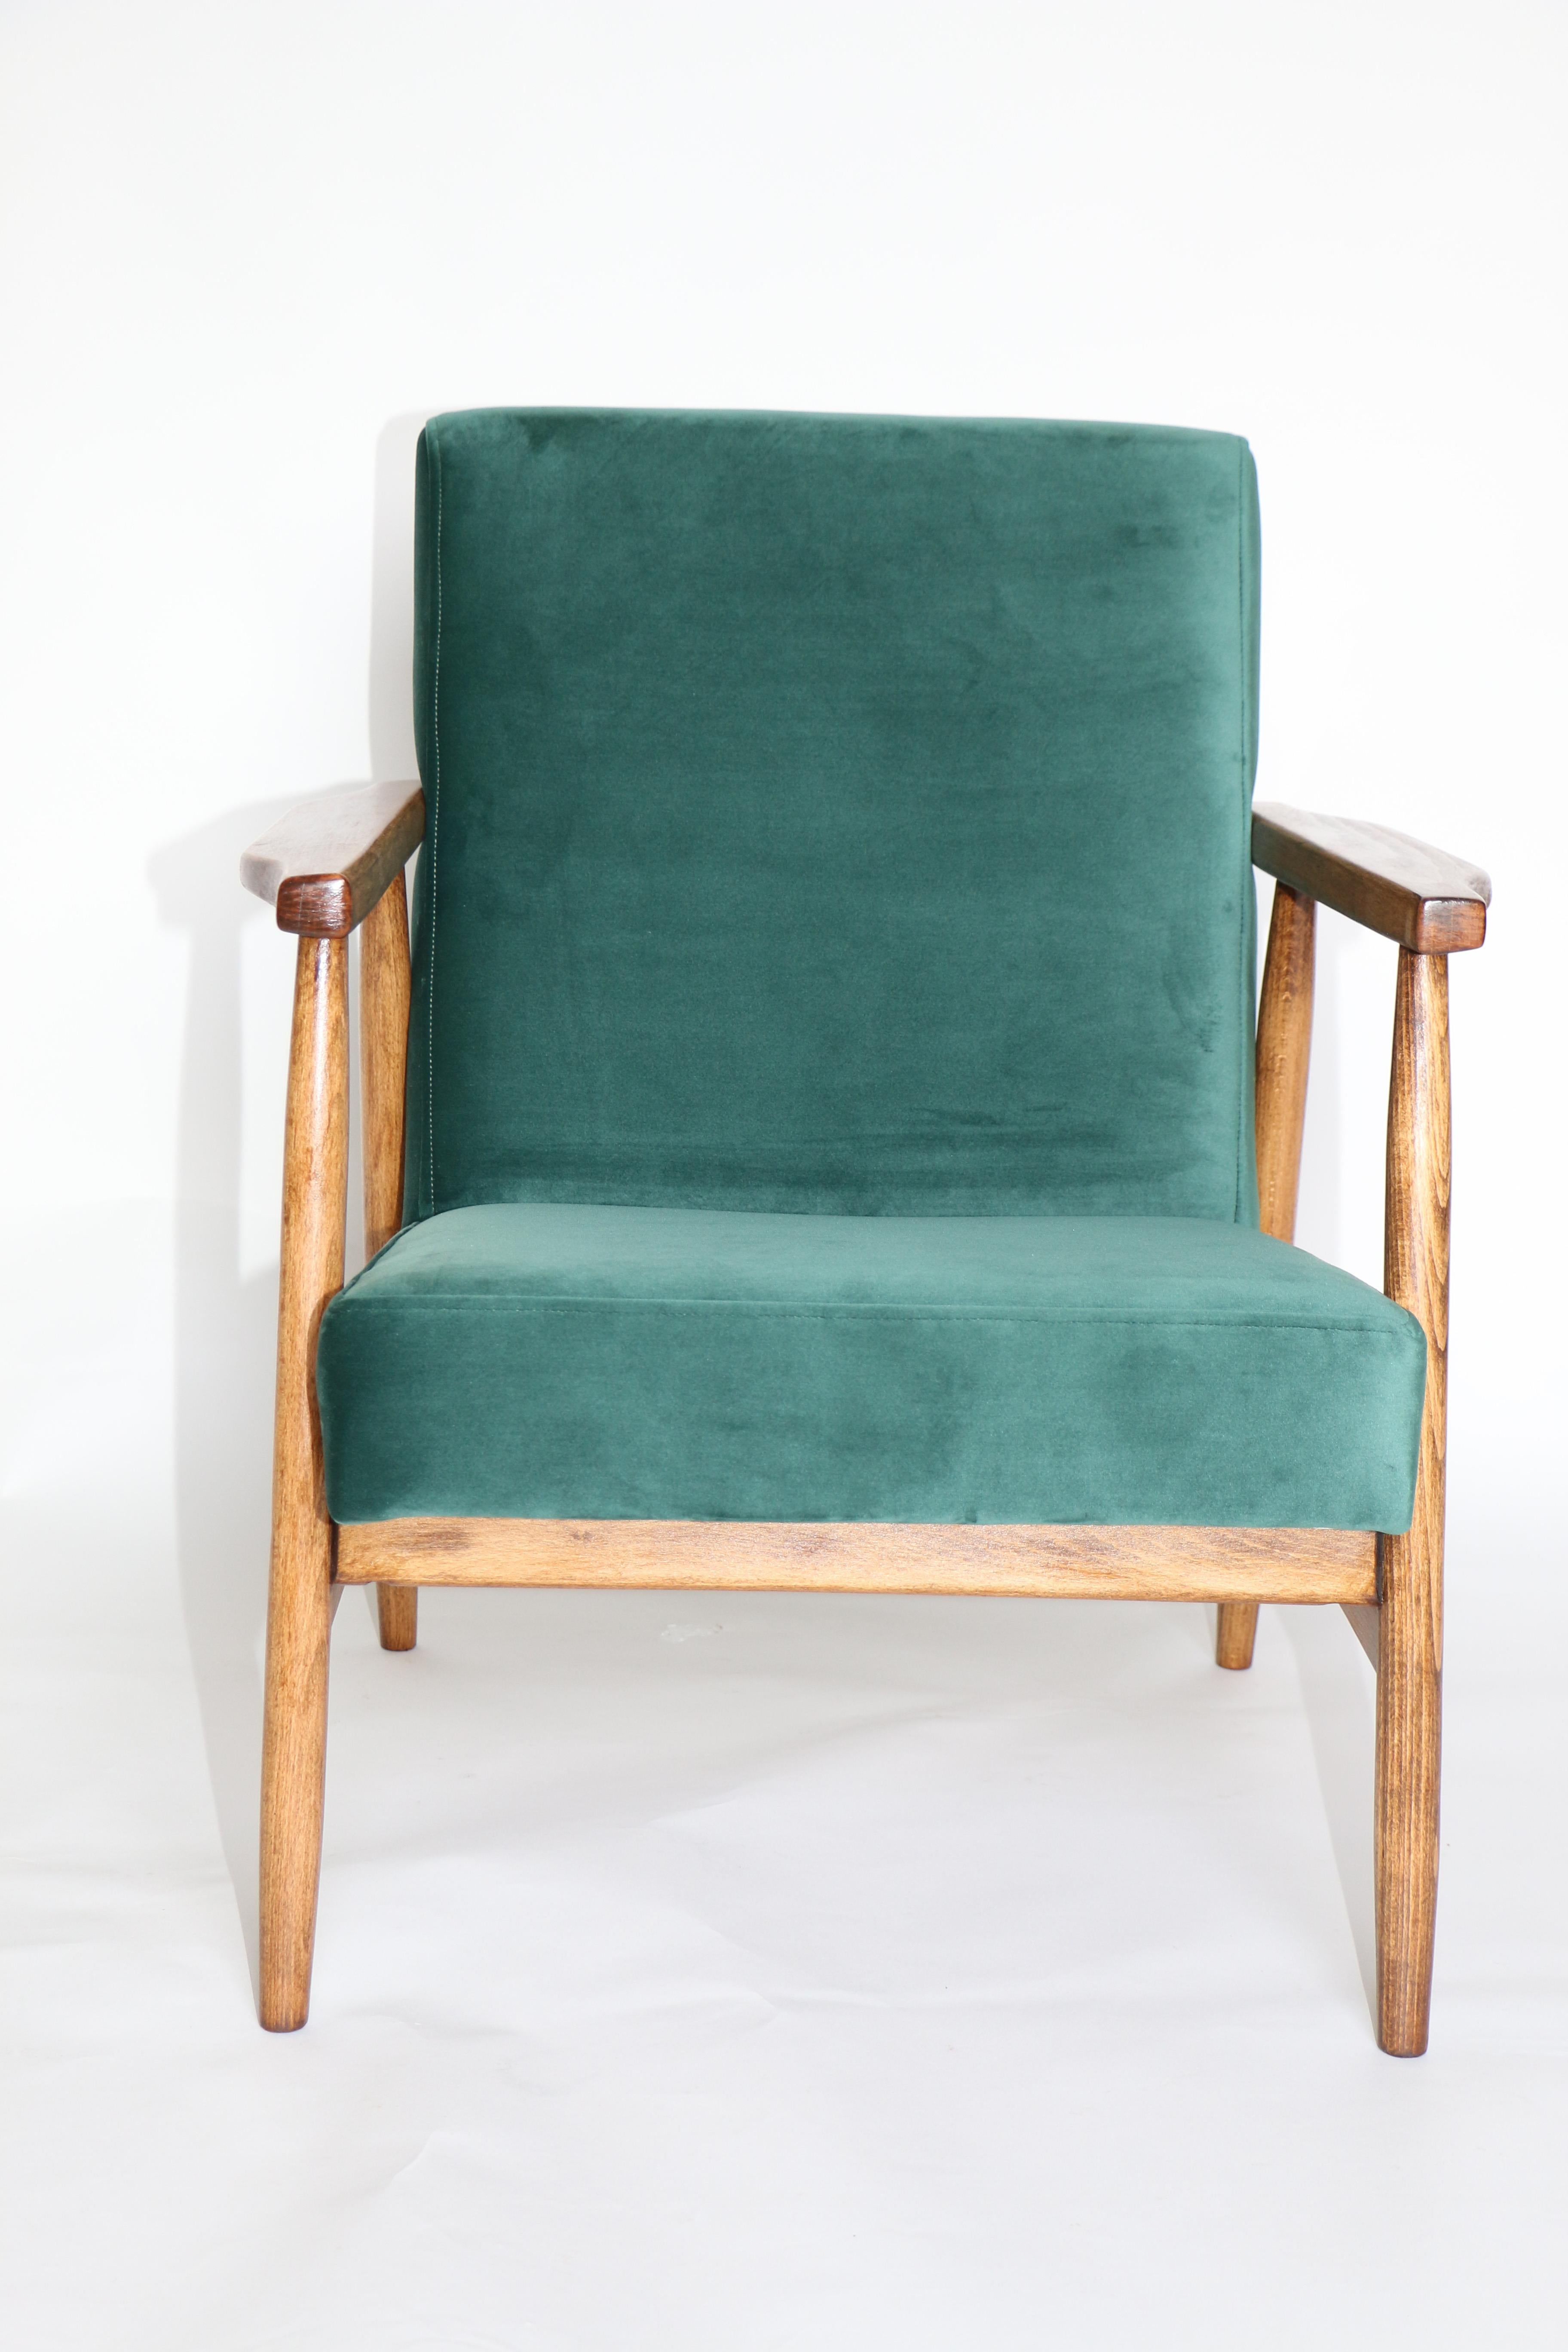 Polish armchairs in bottle green velvet from 1970s, new upholstery covered with velvet fabric in fashionable green color, finished with wooden chair cushion. Wooden elements in natural oak color. Perfect condition. This model is one of the most